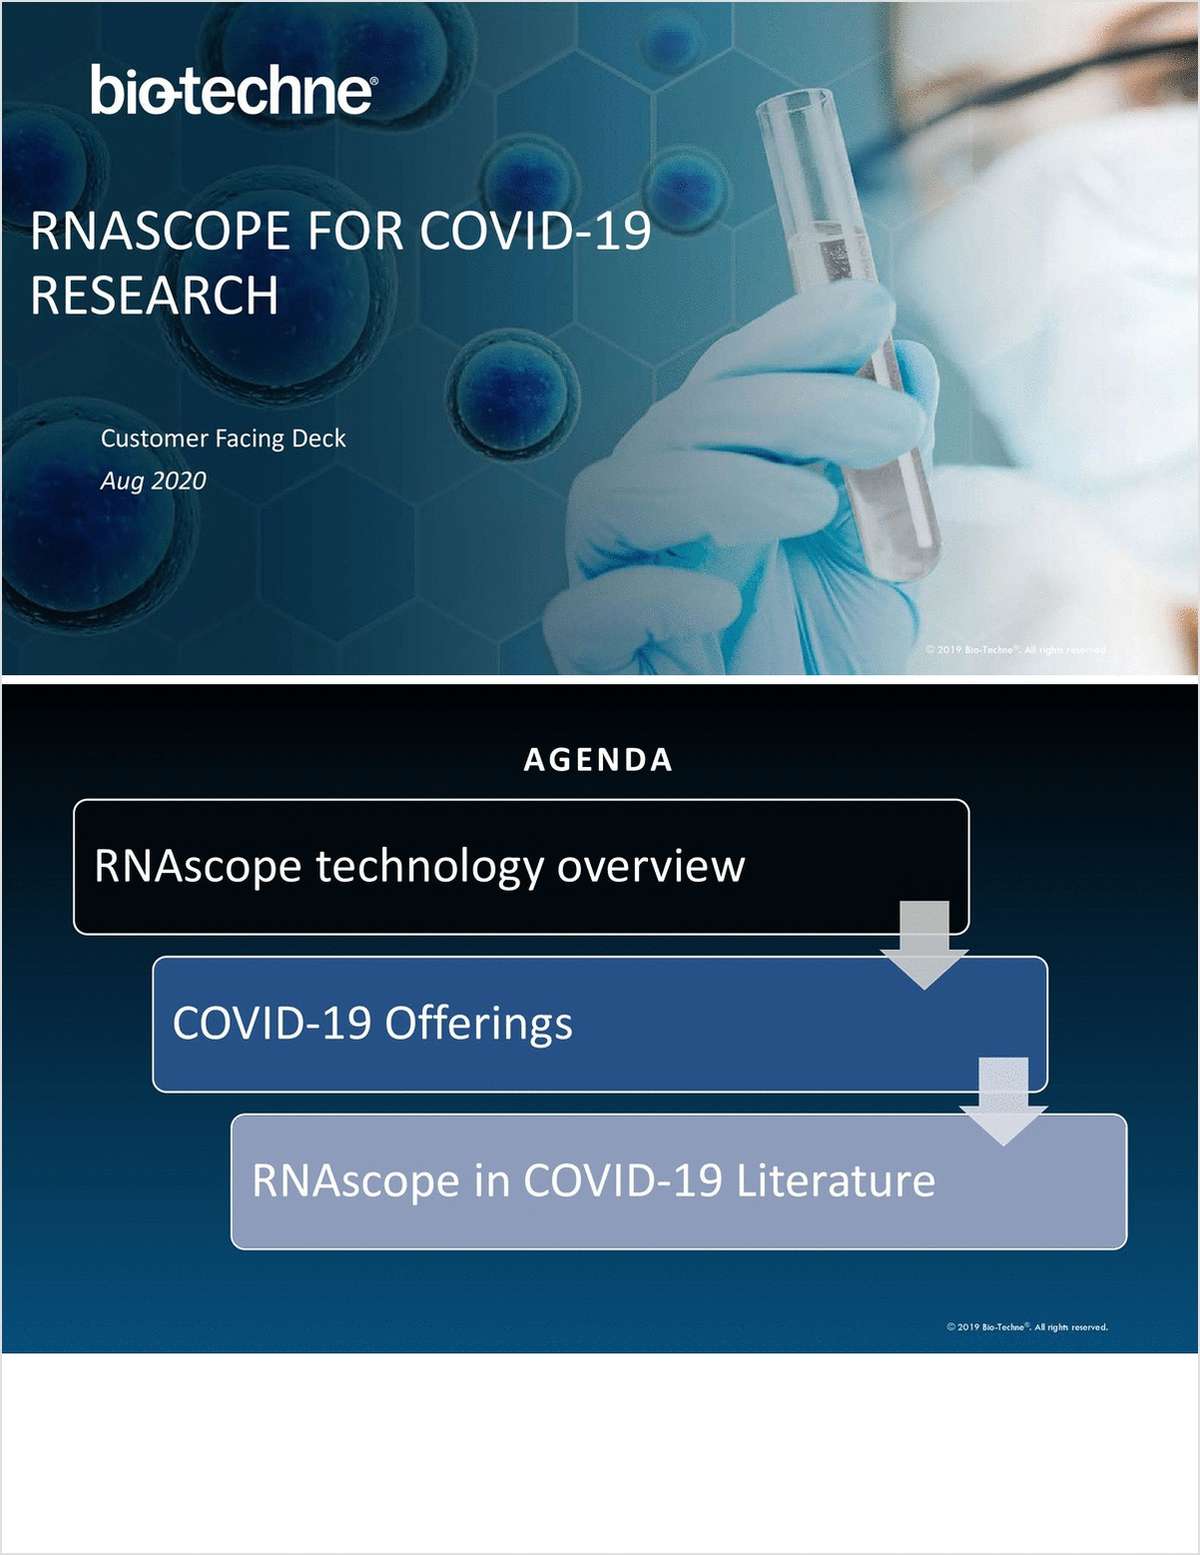 RNAscope for COVID-19 Research